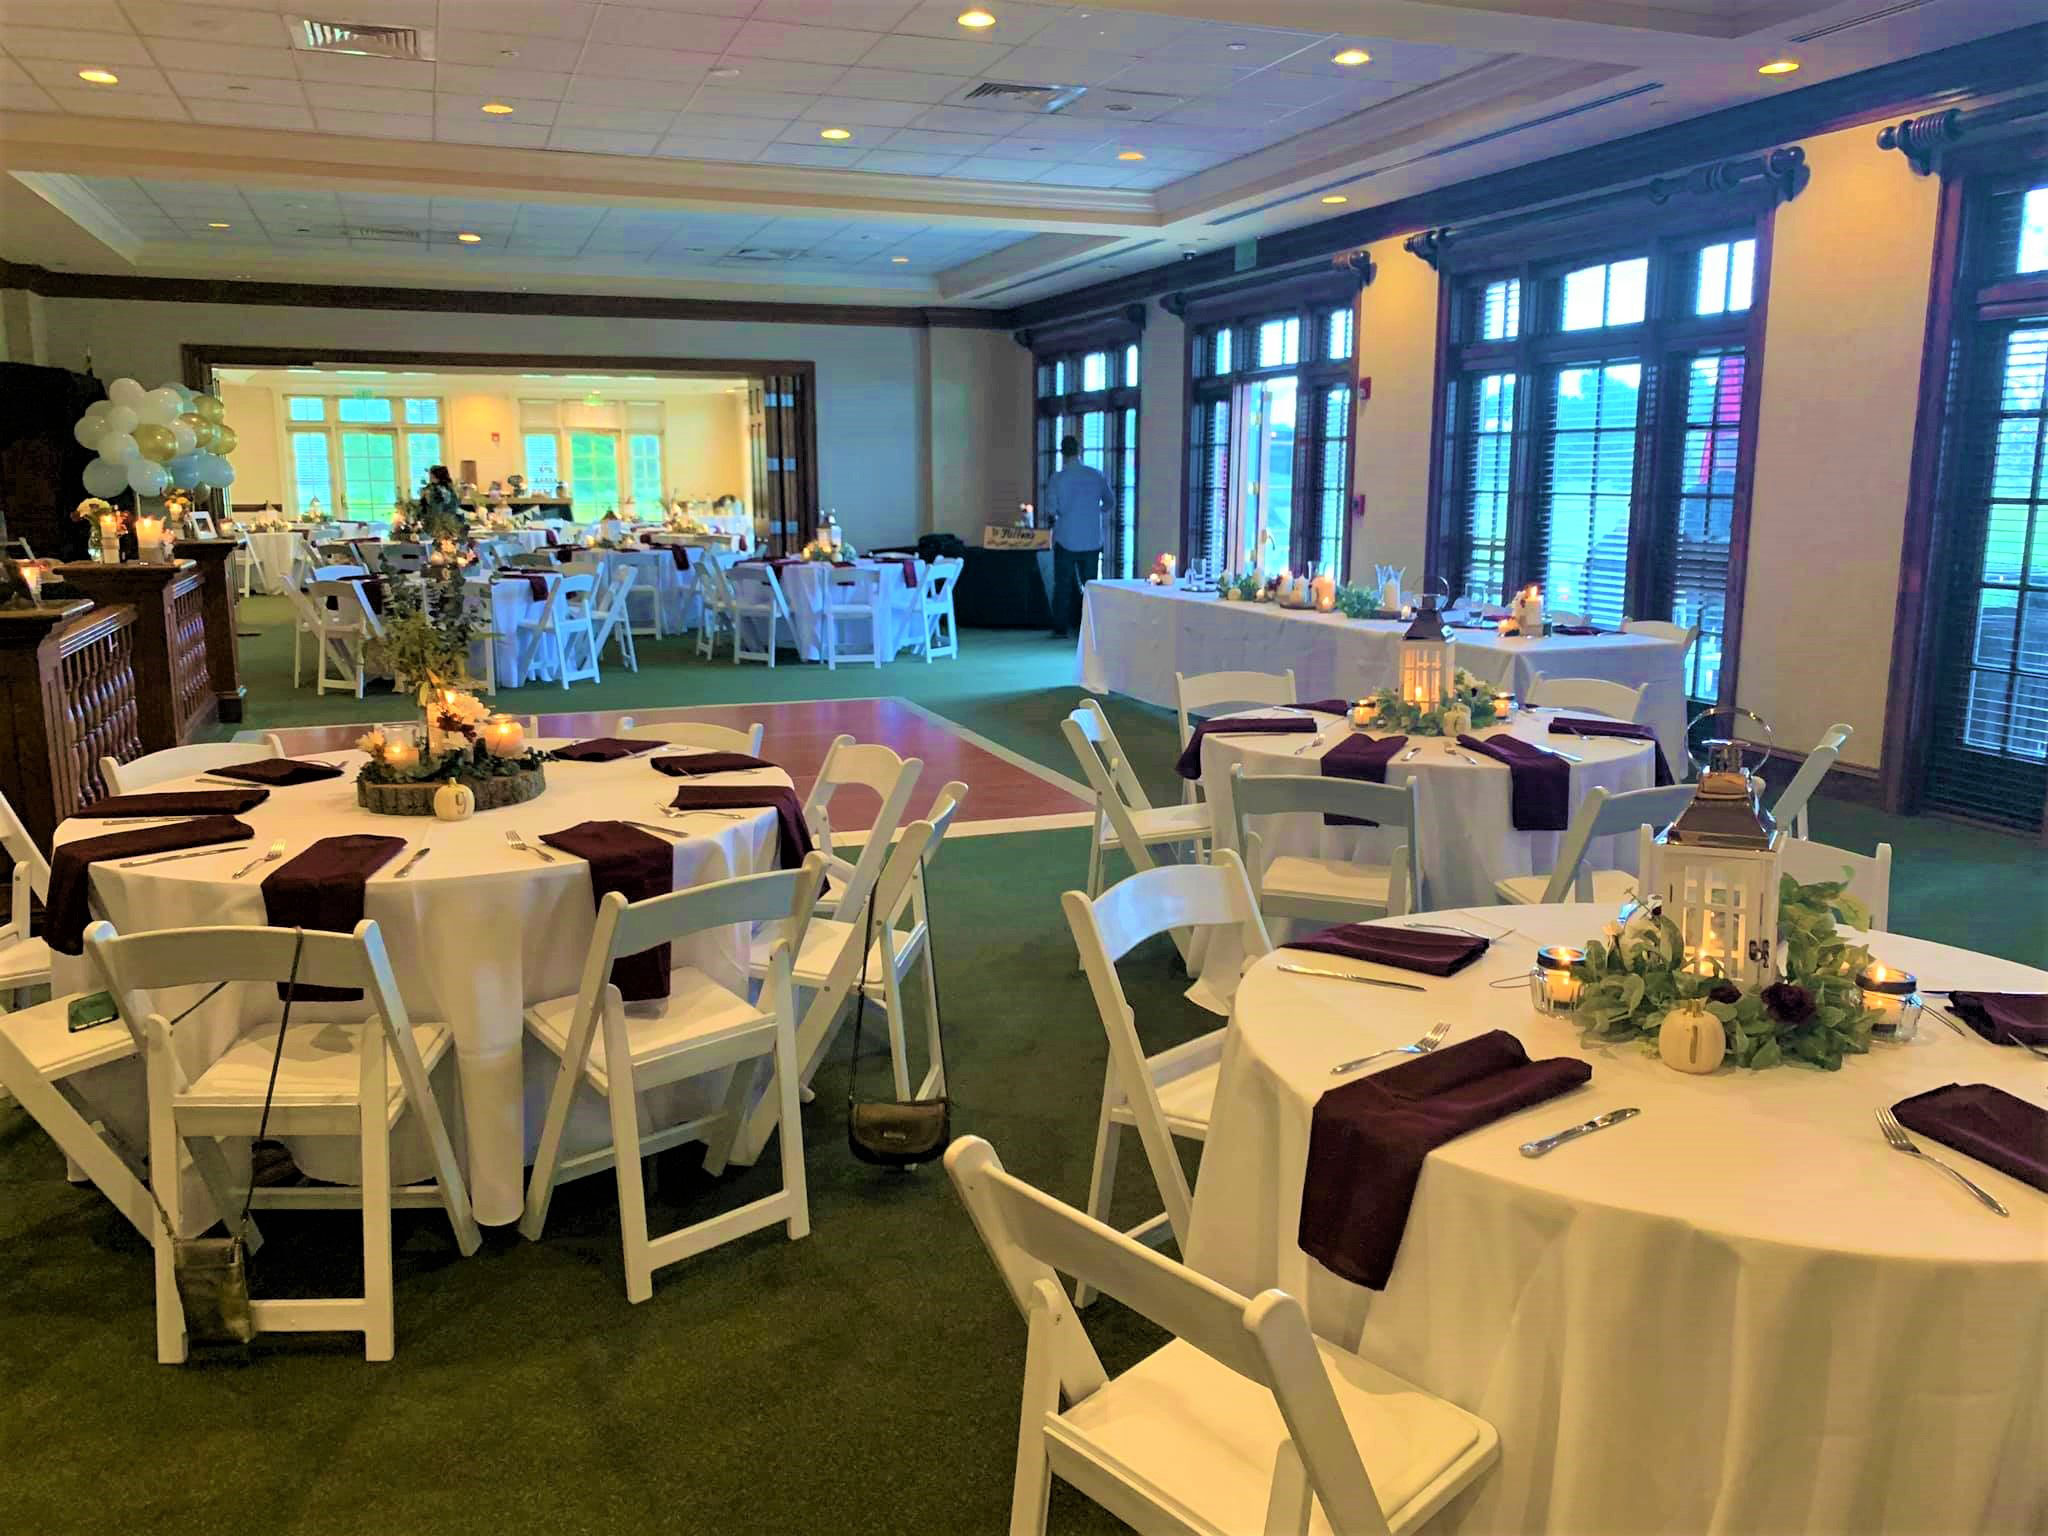 Host Your Festivity with Elegance at the Best Party Venue in Virginia Beach